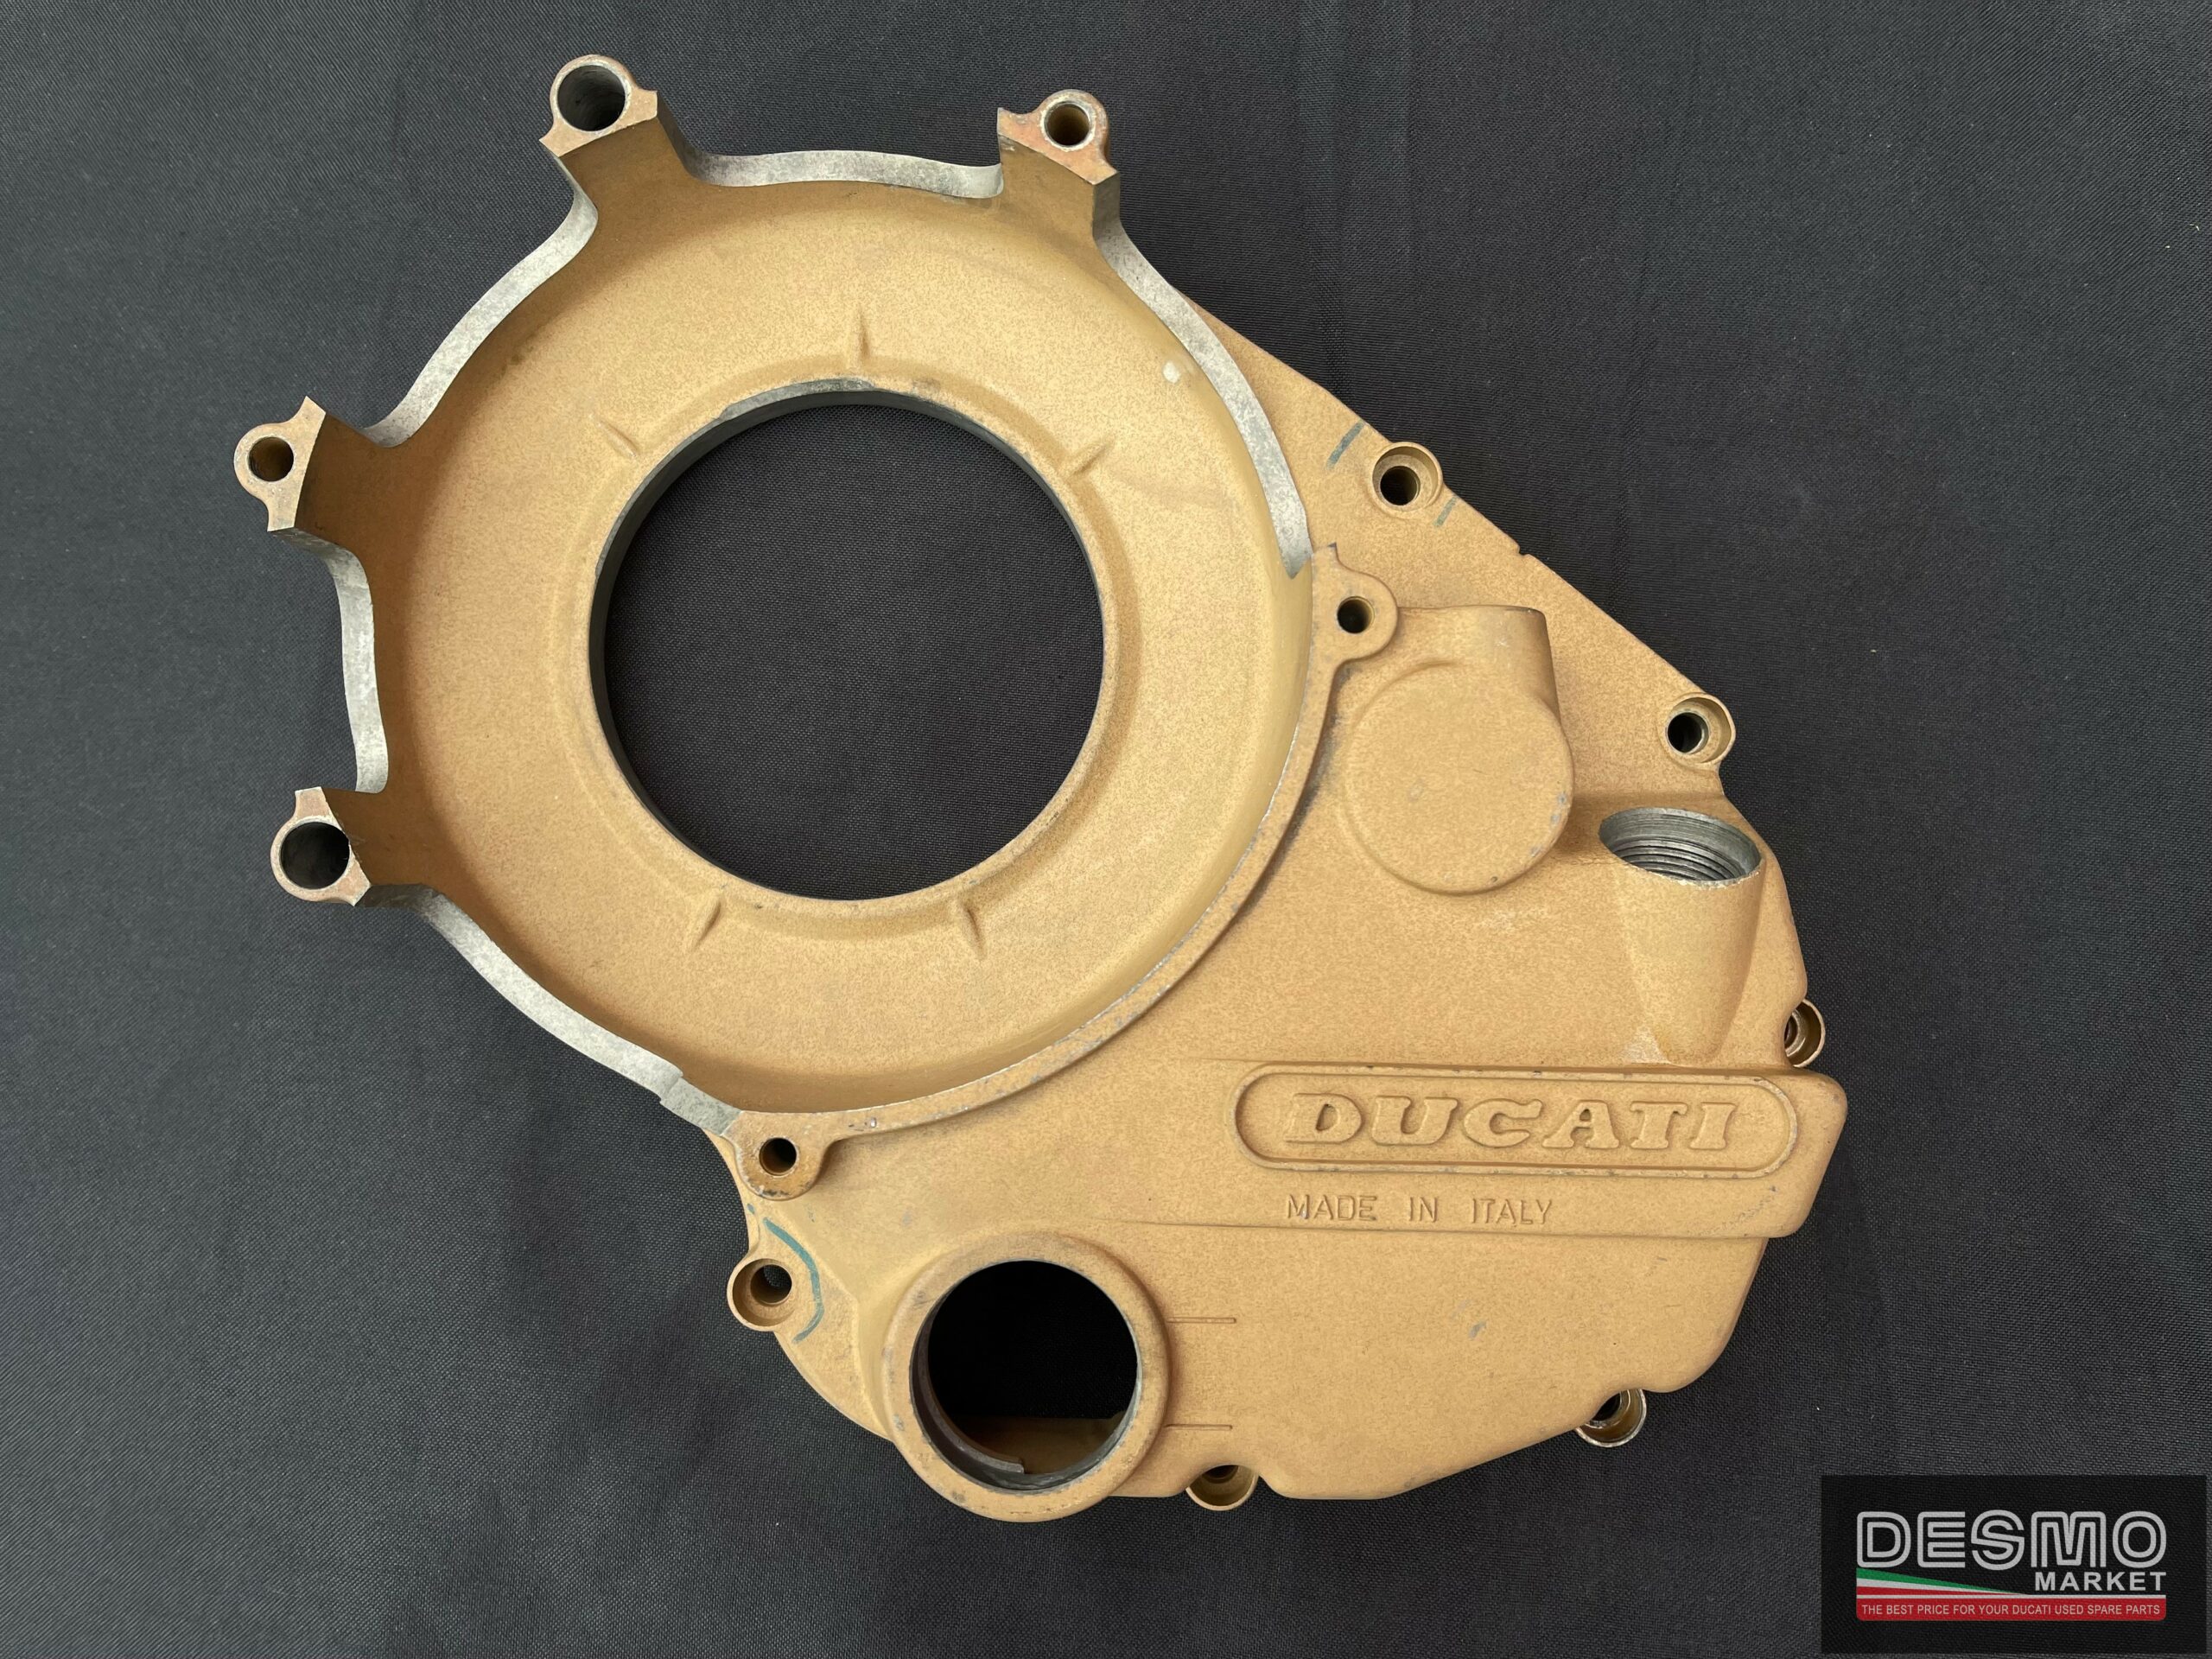 Spare parts for new and used Ducati motorcycles | Desmo Market